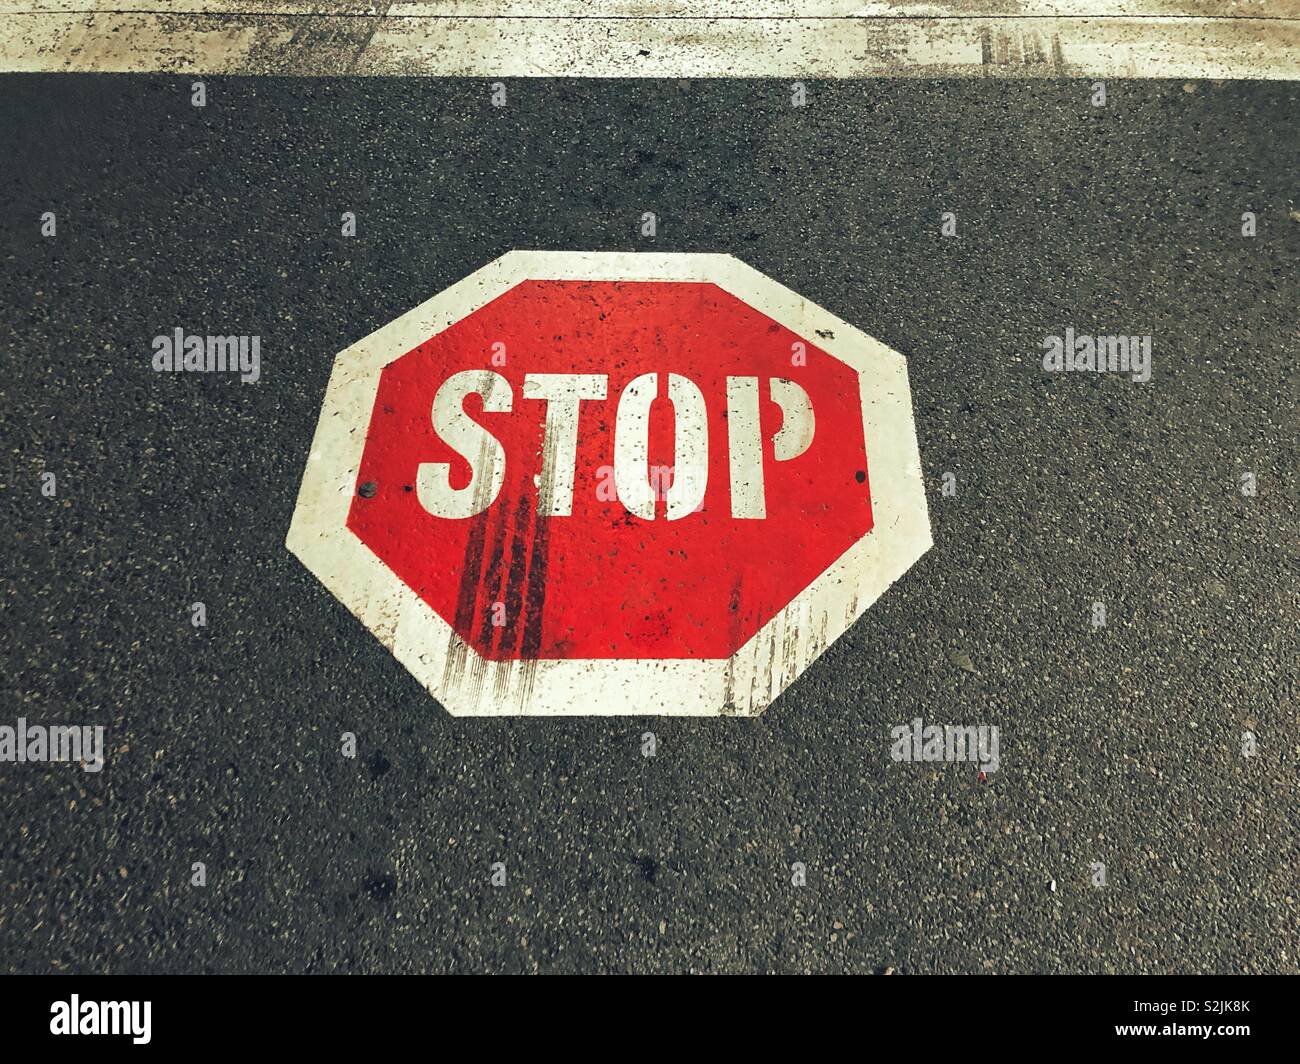 Stop sign road marking with skid marks across it Stock Photo